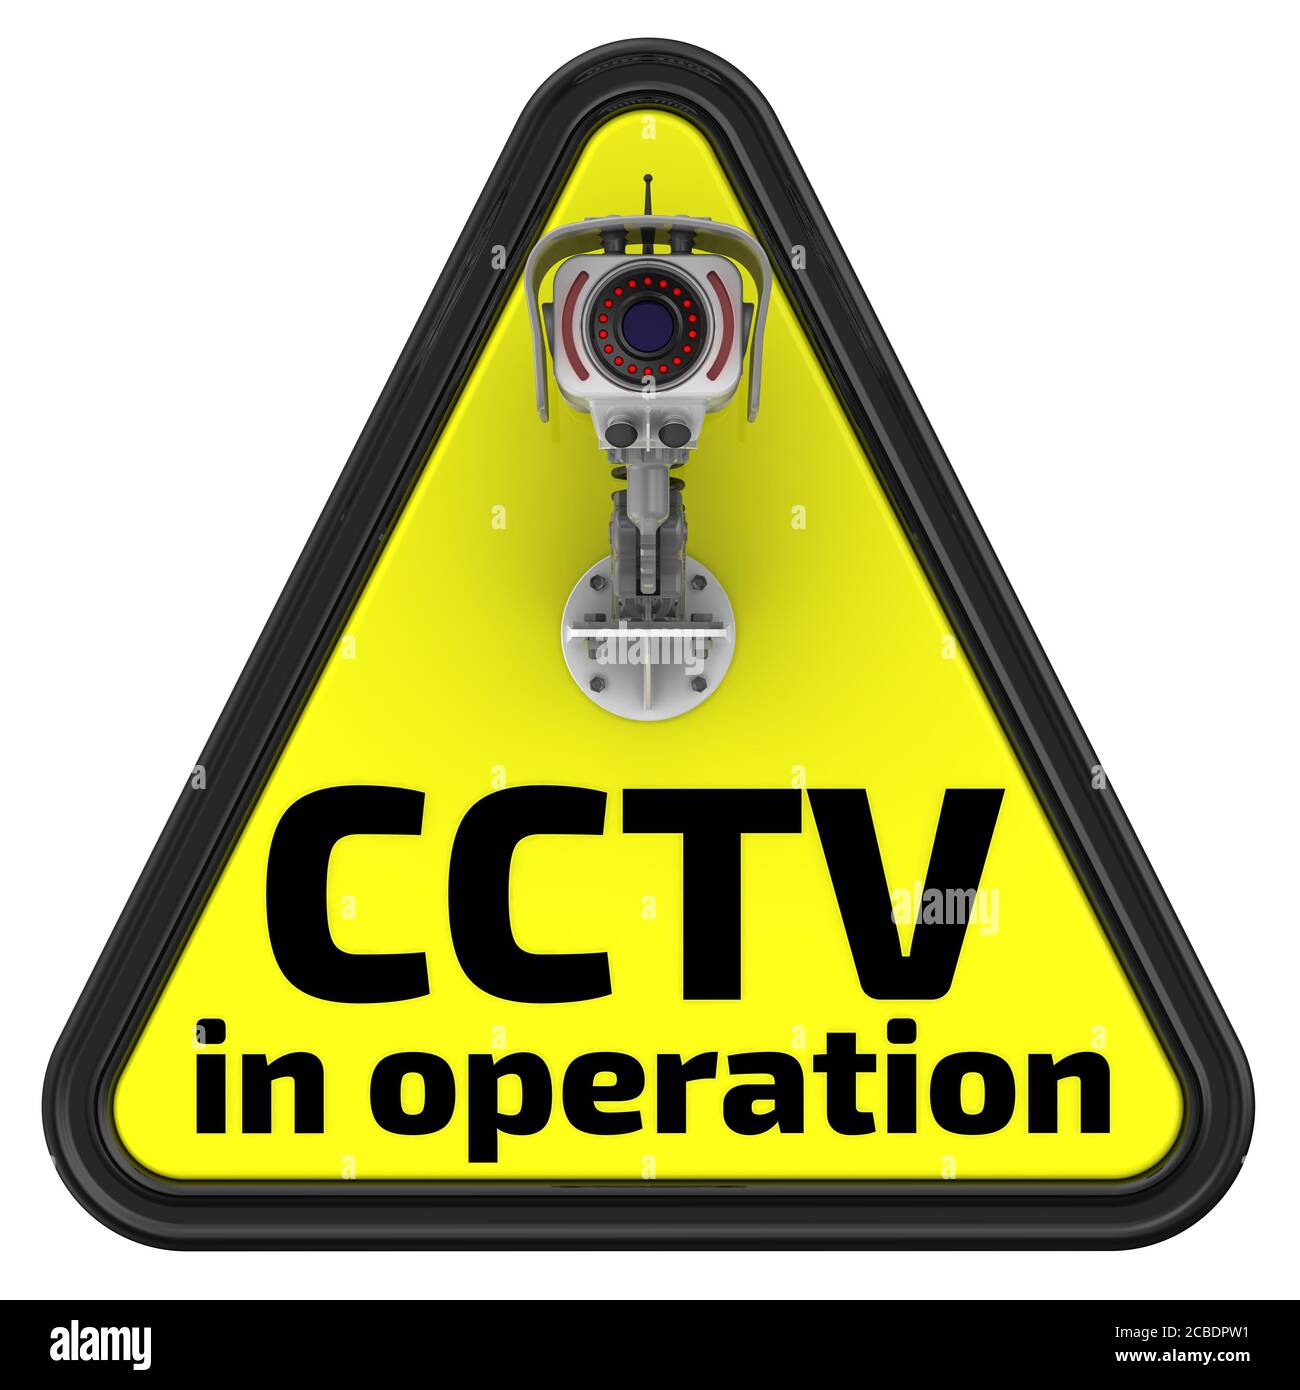 CCTV in operation. The road sign. Yellow road sign with inscription 'CCTV in operation' and CCTV camera. 3D illustration. Isolated Stock Photo